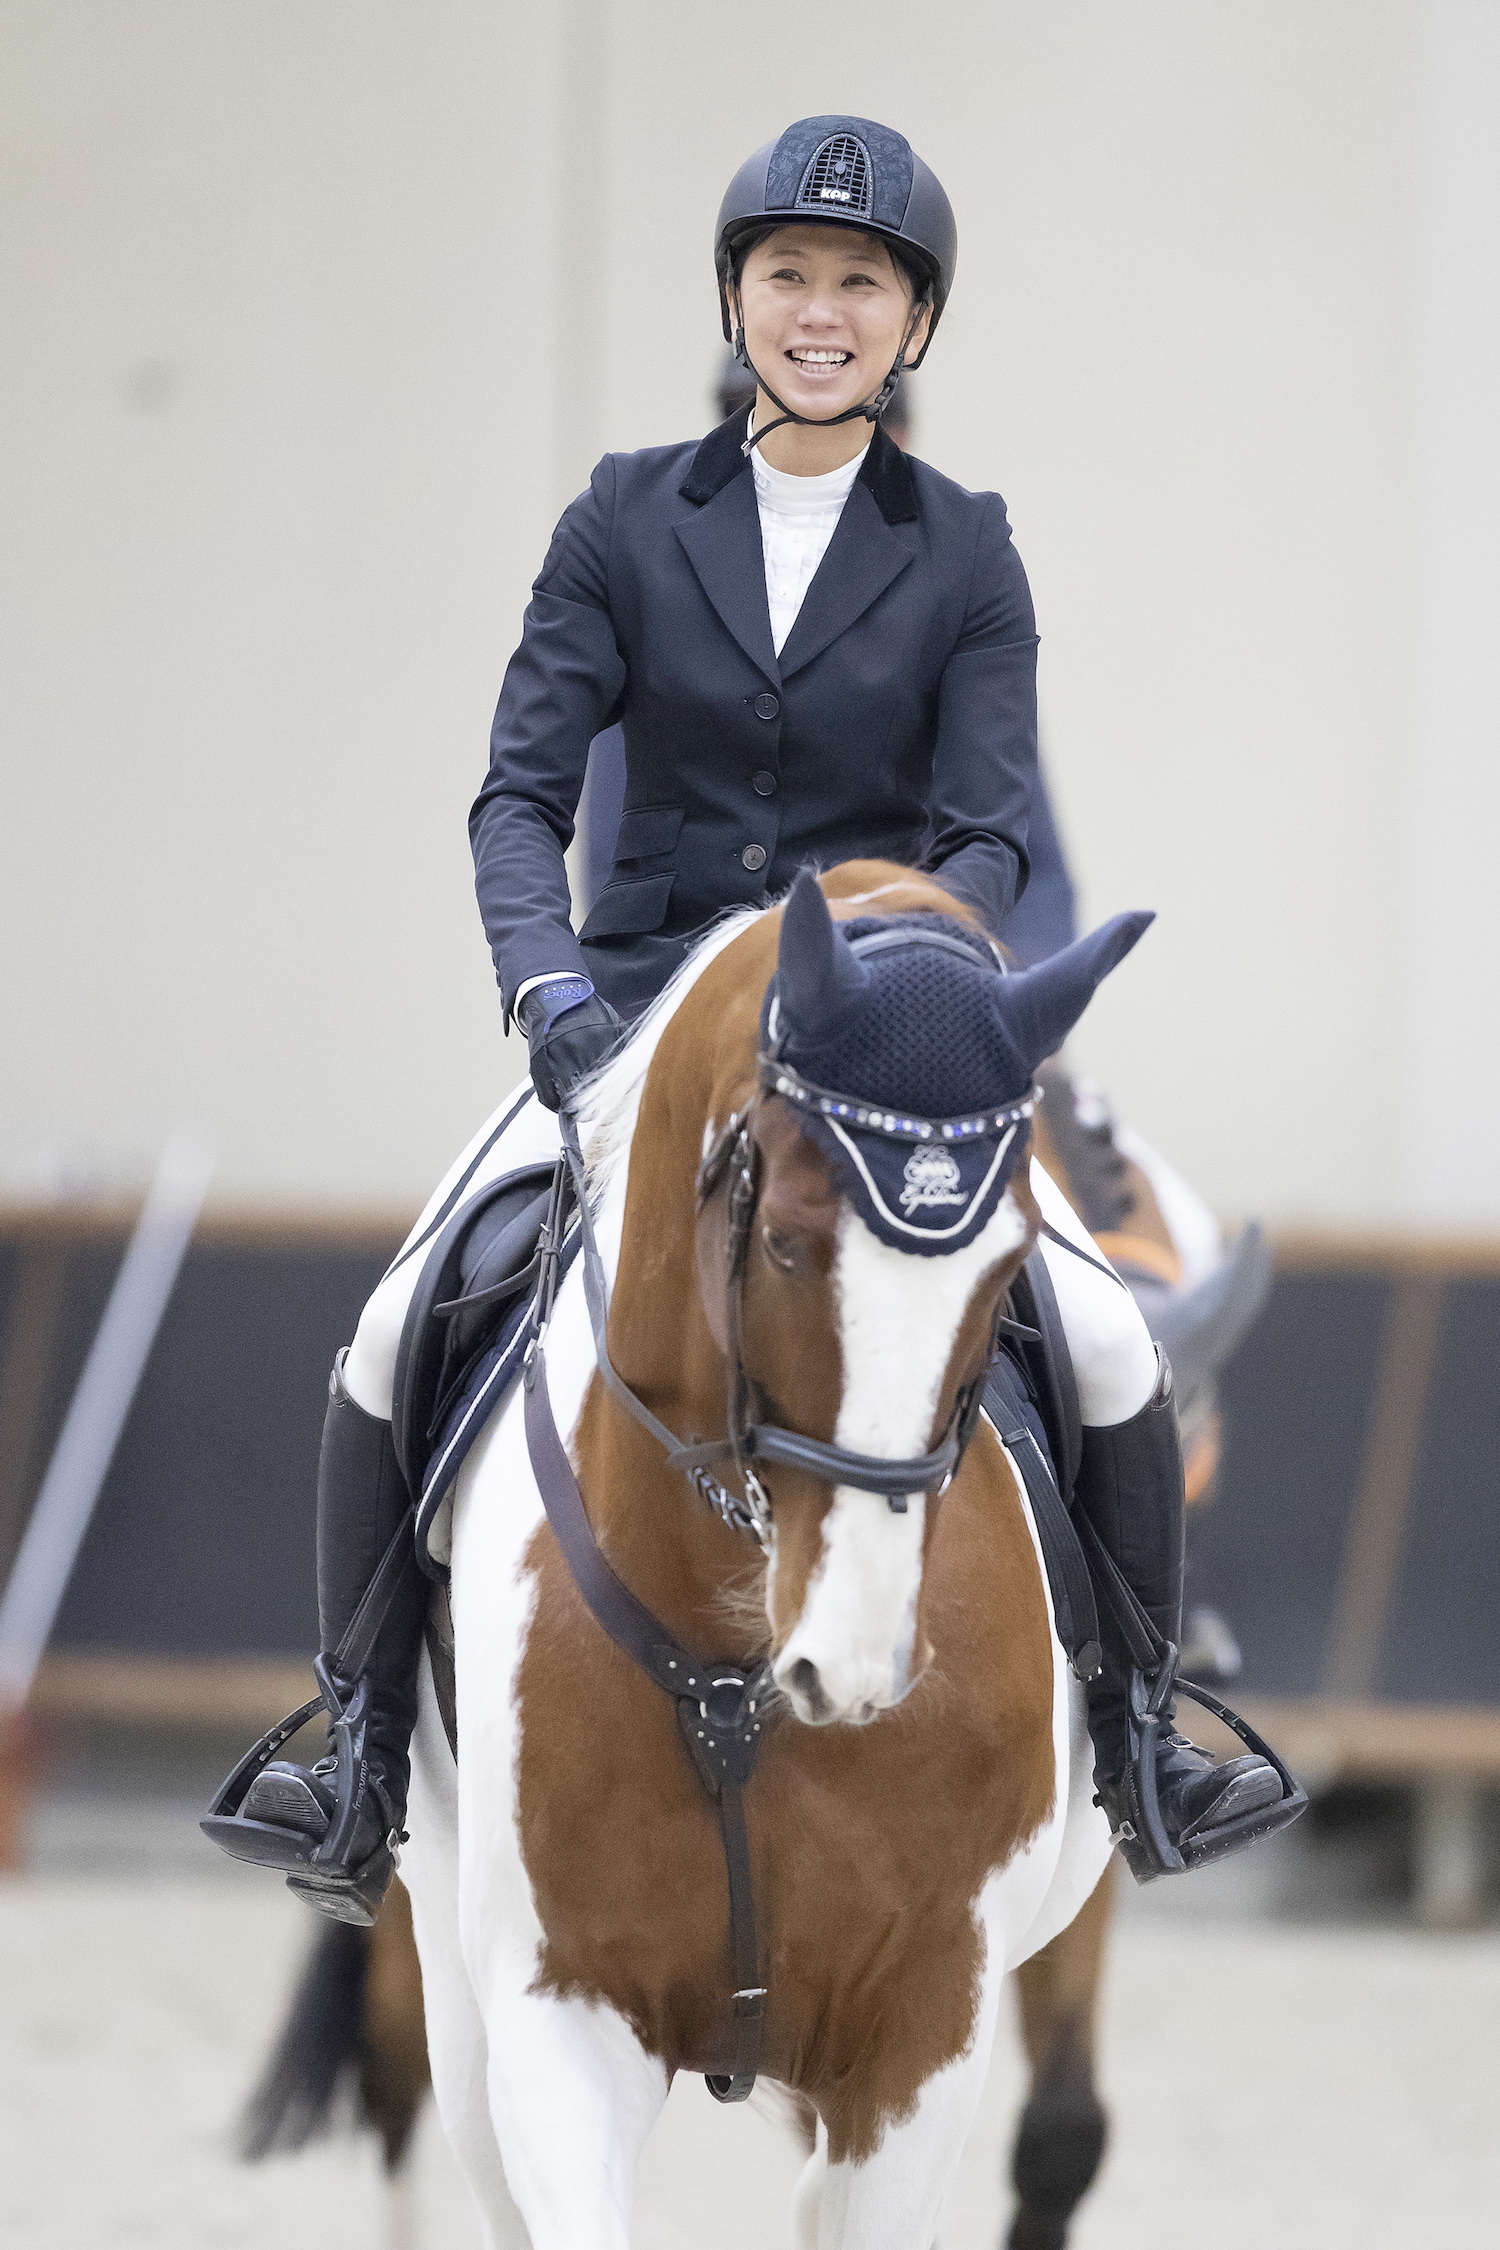 As winners of the FEI Jumping World Cup™ 2018/2019 Japan League, Shino Hirota and her skewbald horse Life is Beautiful, who competed in harness-racing earlier his career, have qualified for the Longines 2019 Final which will take place in Gothenburg (SWE), the city where this extraordinary horse was born. (FEI/Yusuke Nakanishi)